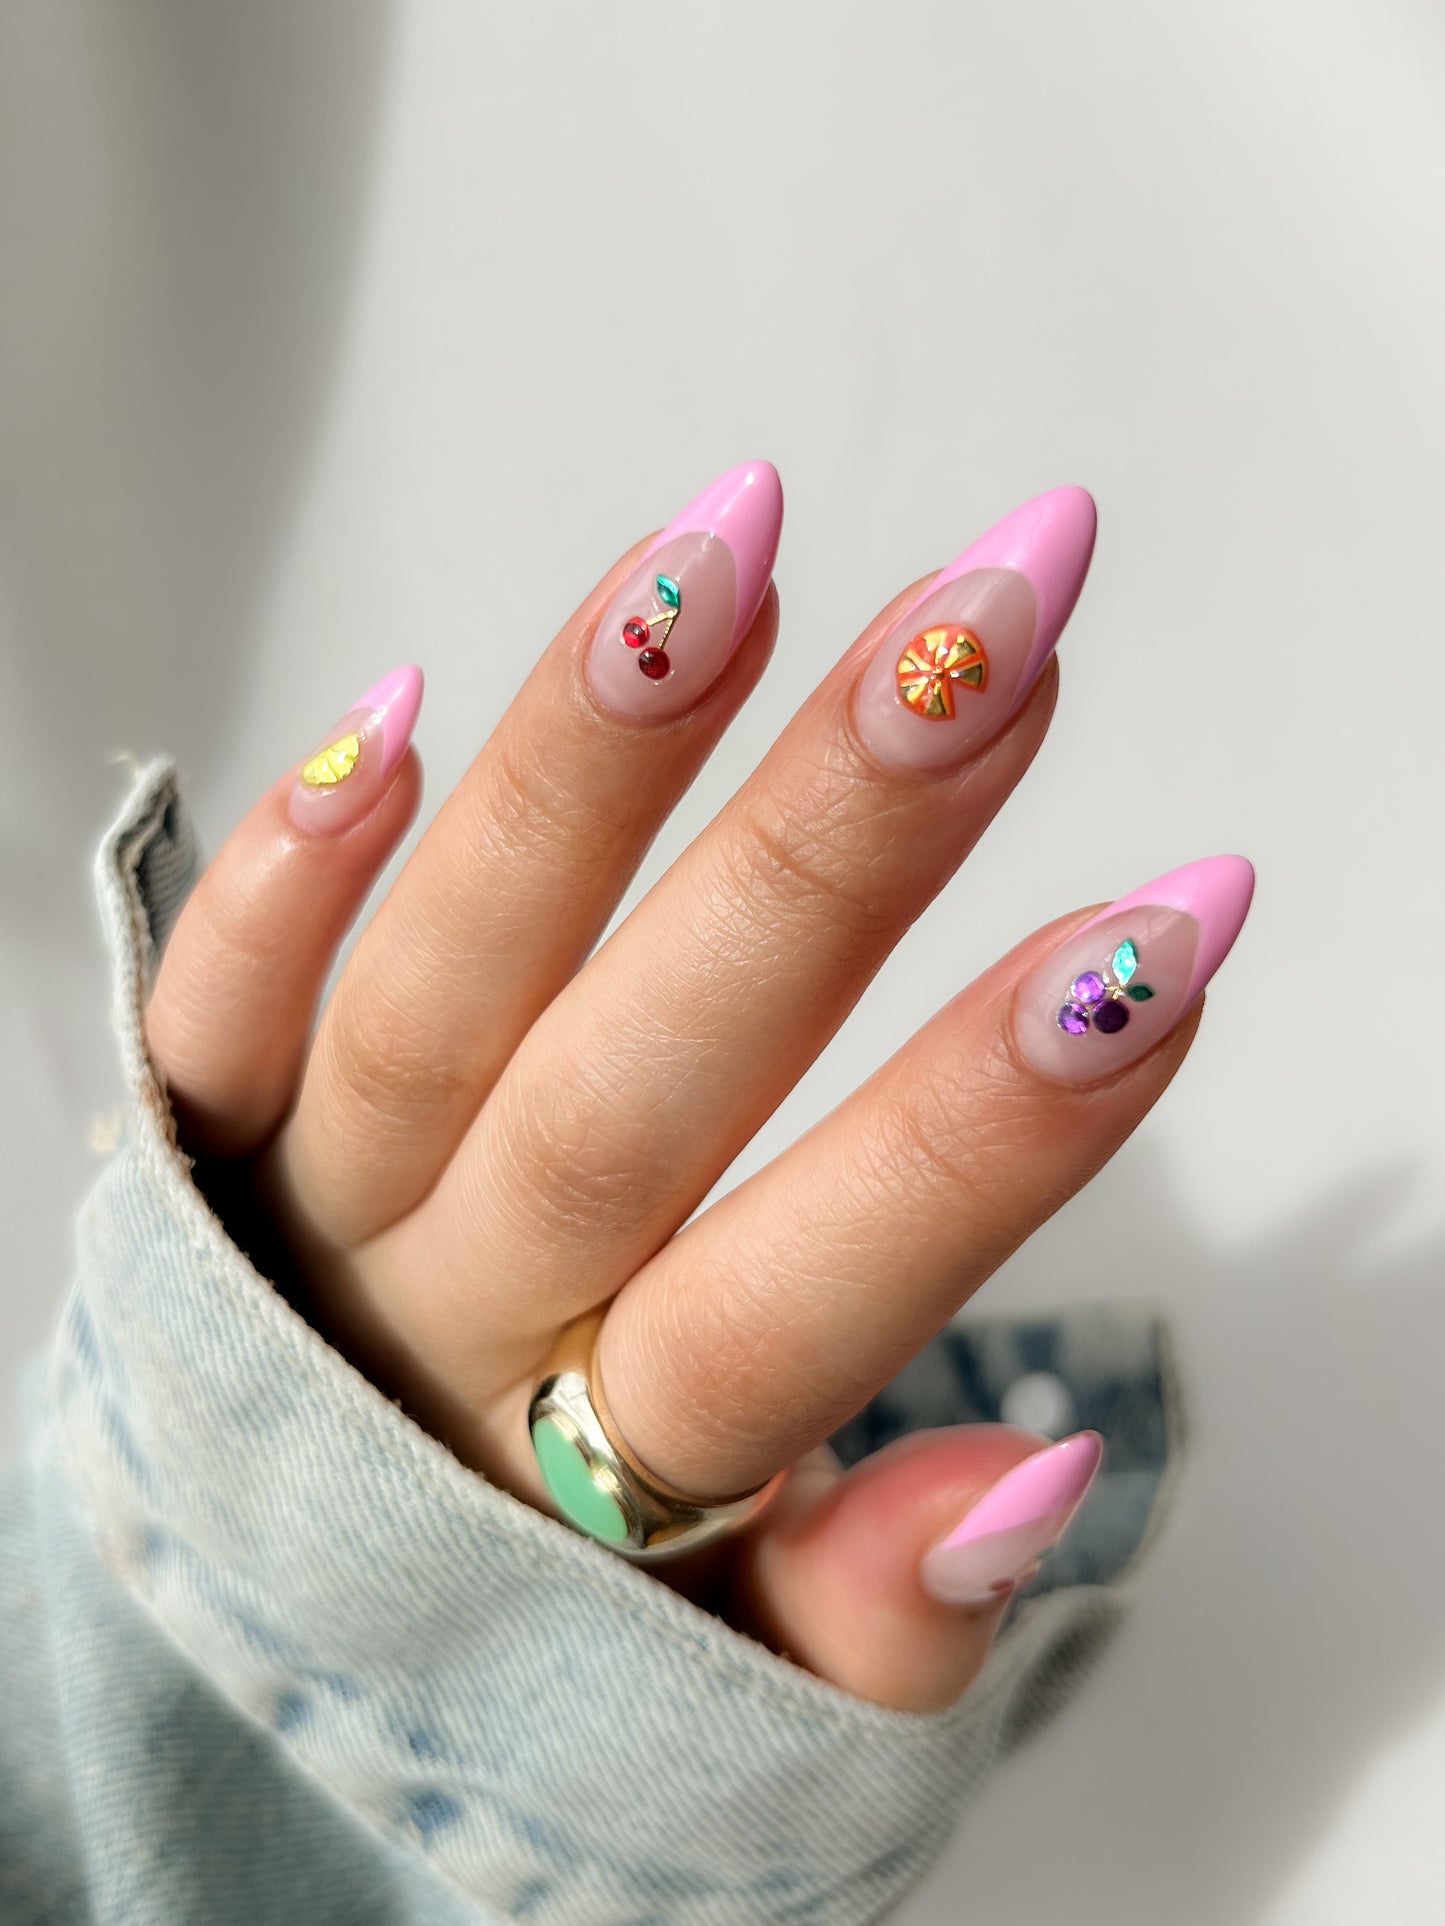 Candy Shop designs on pink french tips